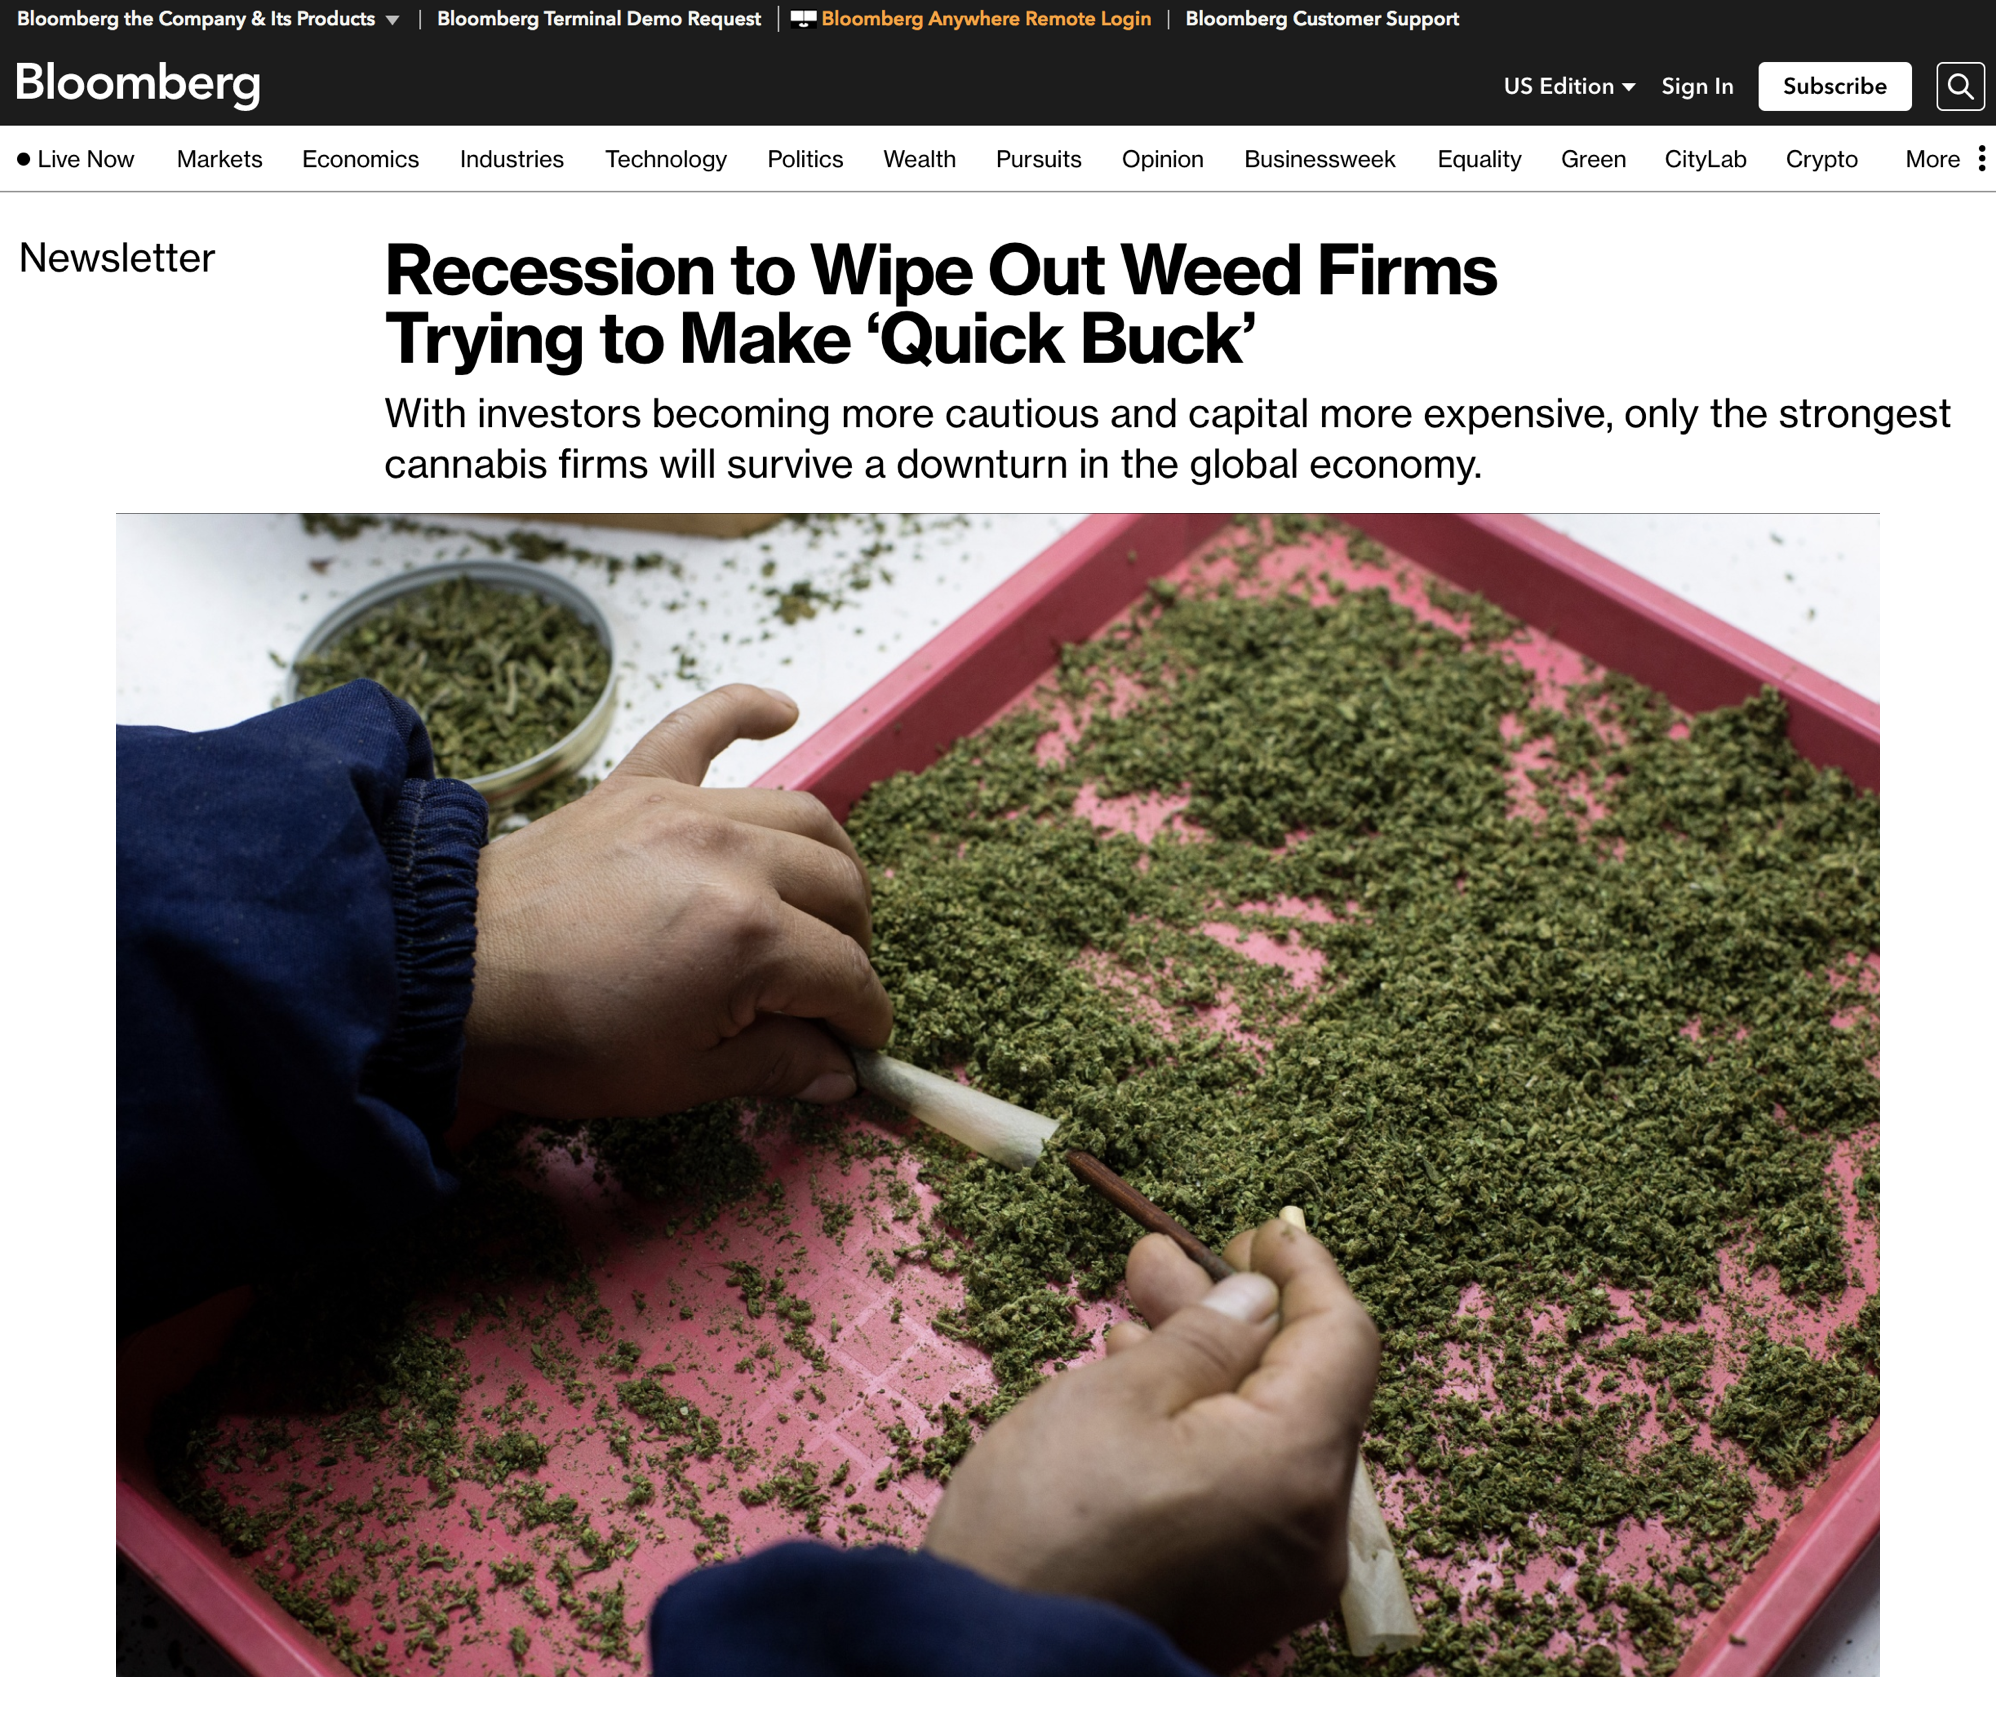 Thumbnail of Recession to Wipe Out Weed Firms Trying to Make ‘Quick Buck’